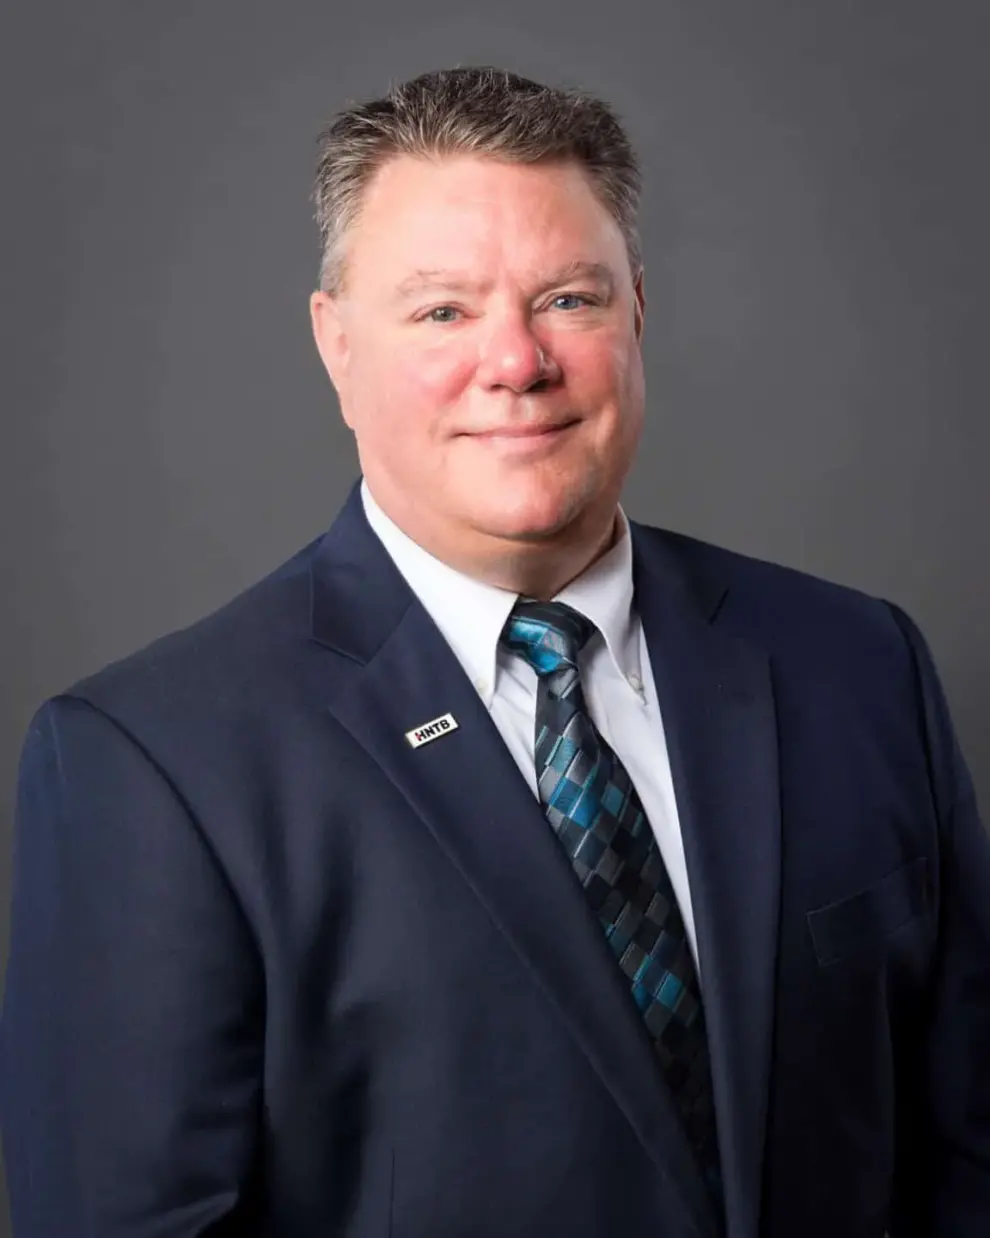 Kevin Lohr joins HNTB’s aviation team as national practice consultant